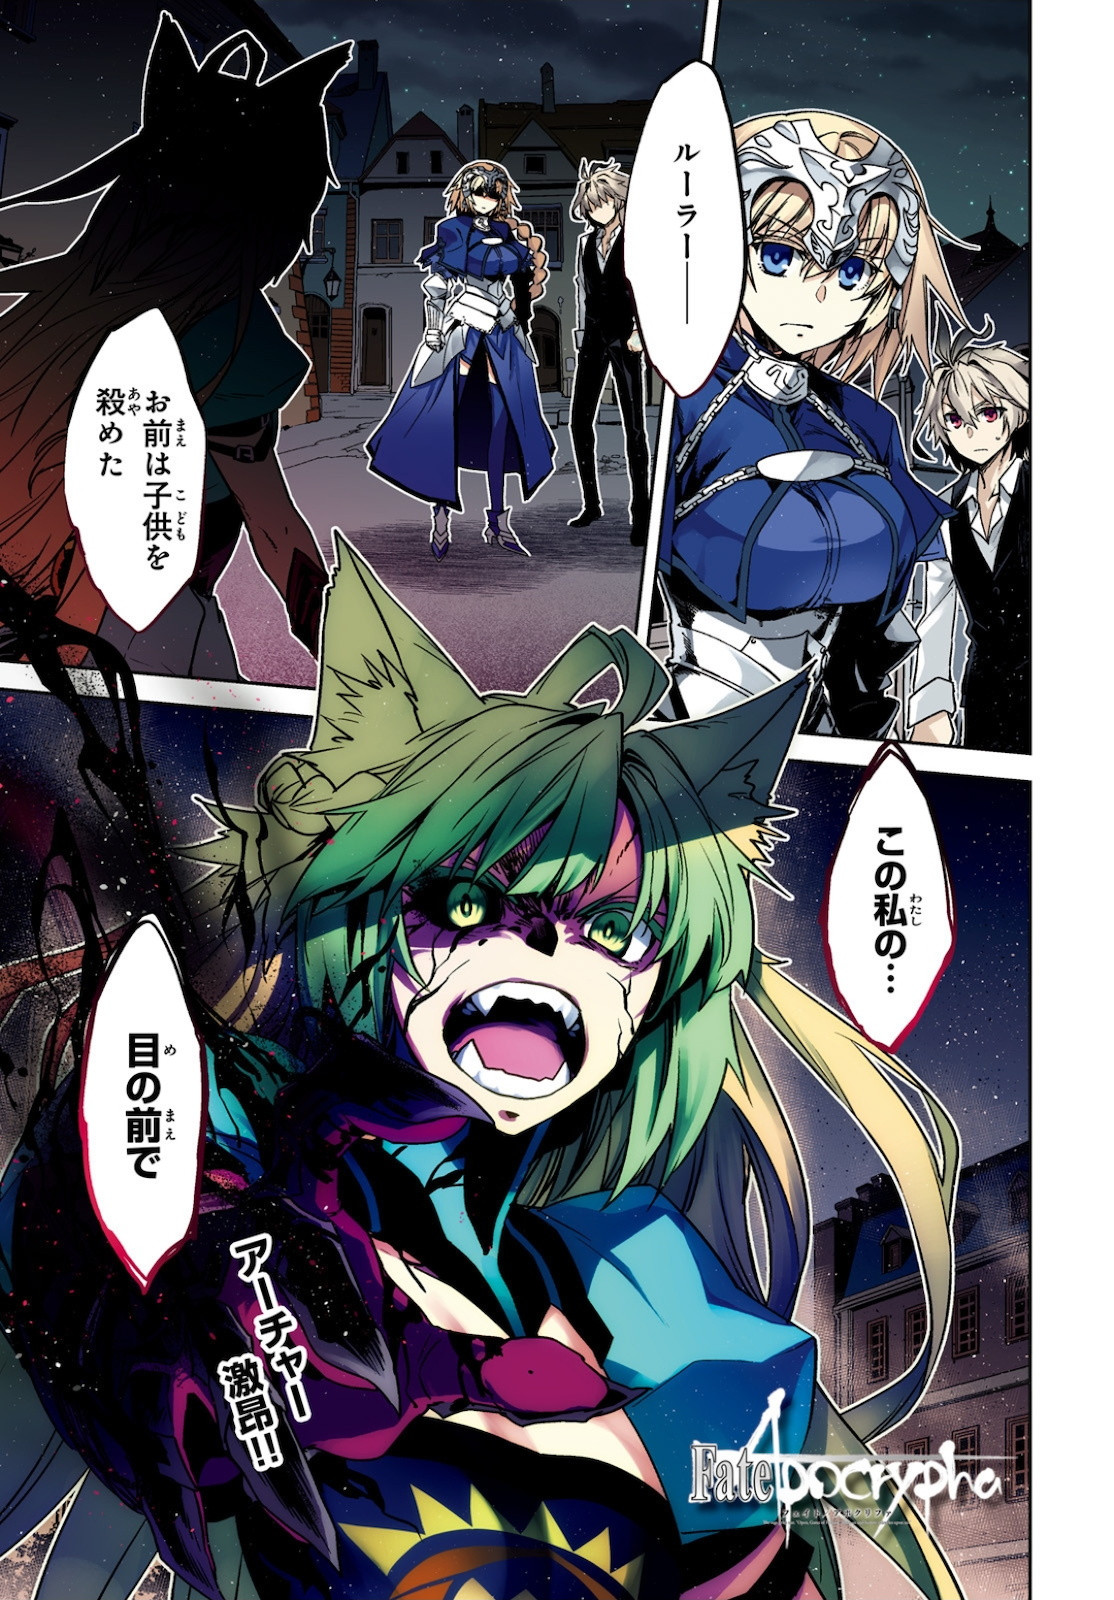 Fate-Apocrypha - Chapter 49 - Page 1